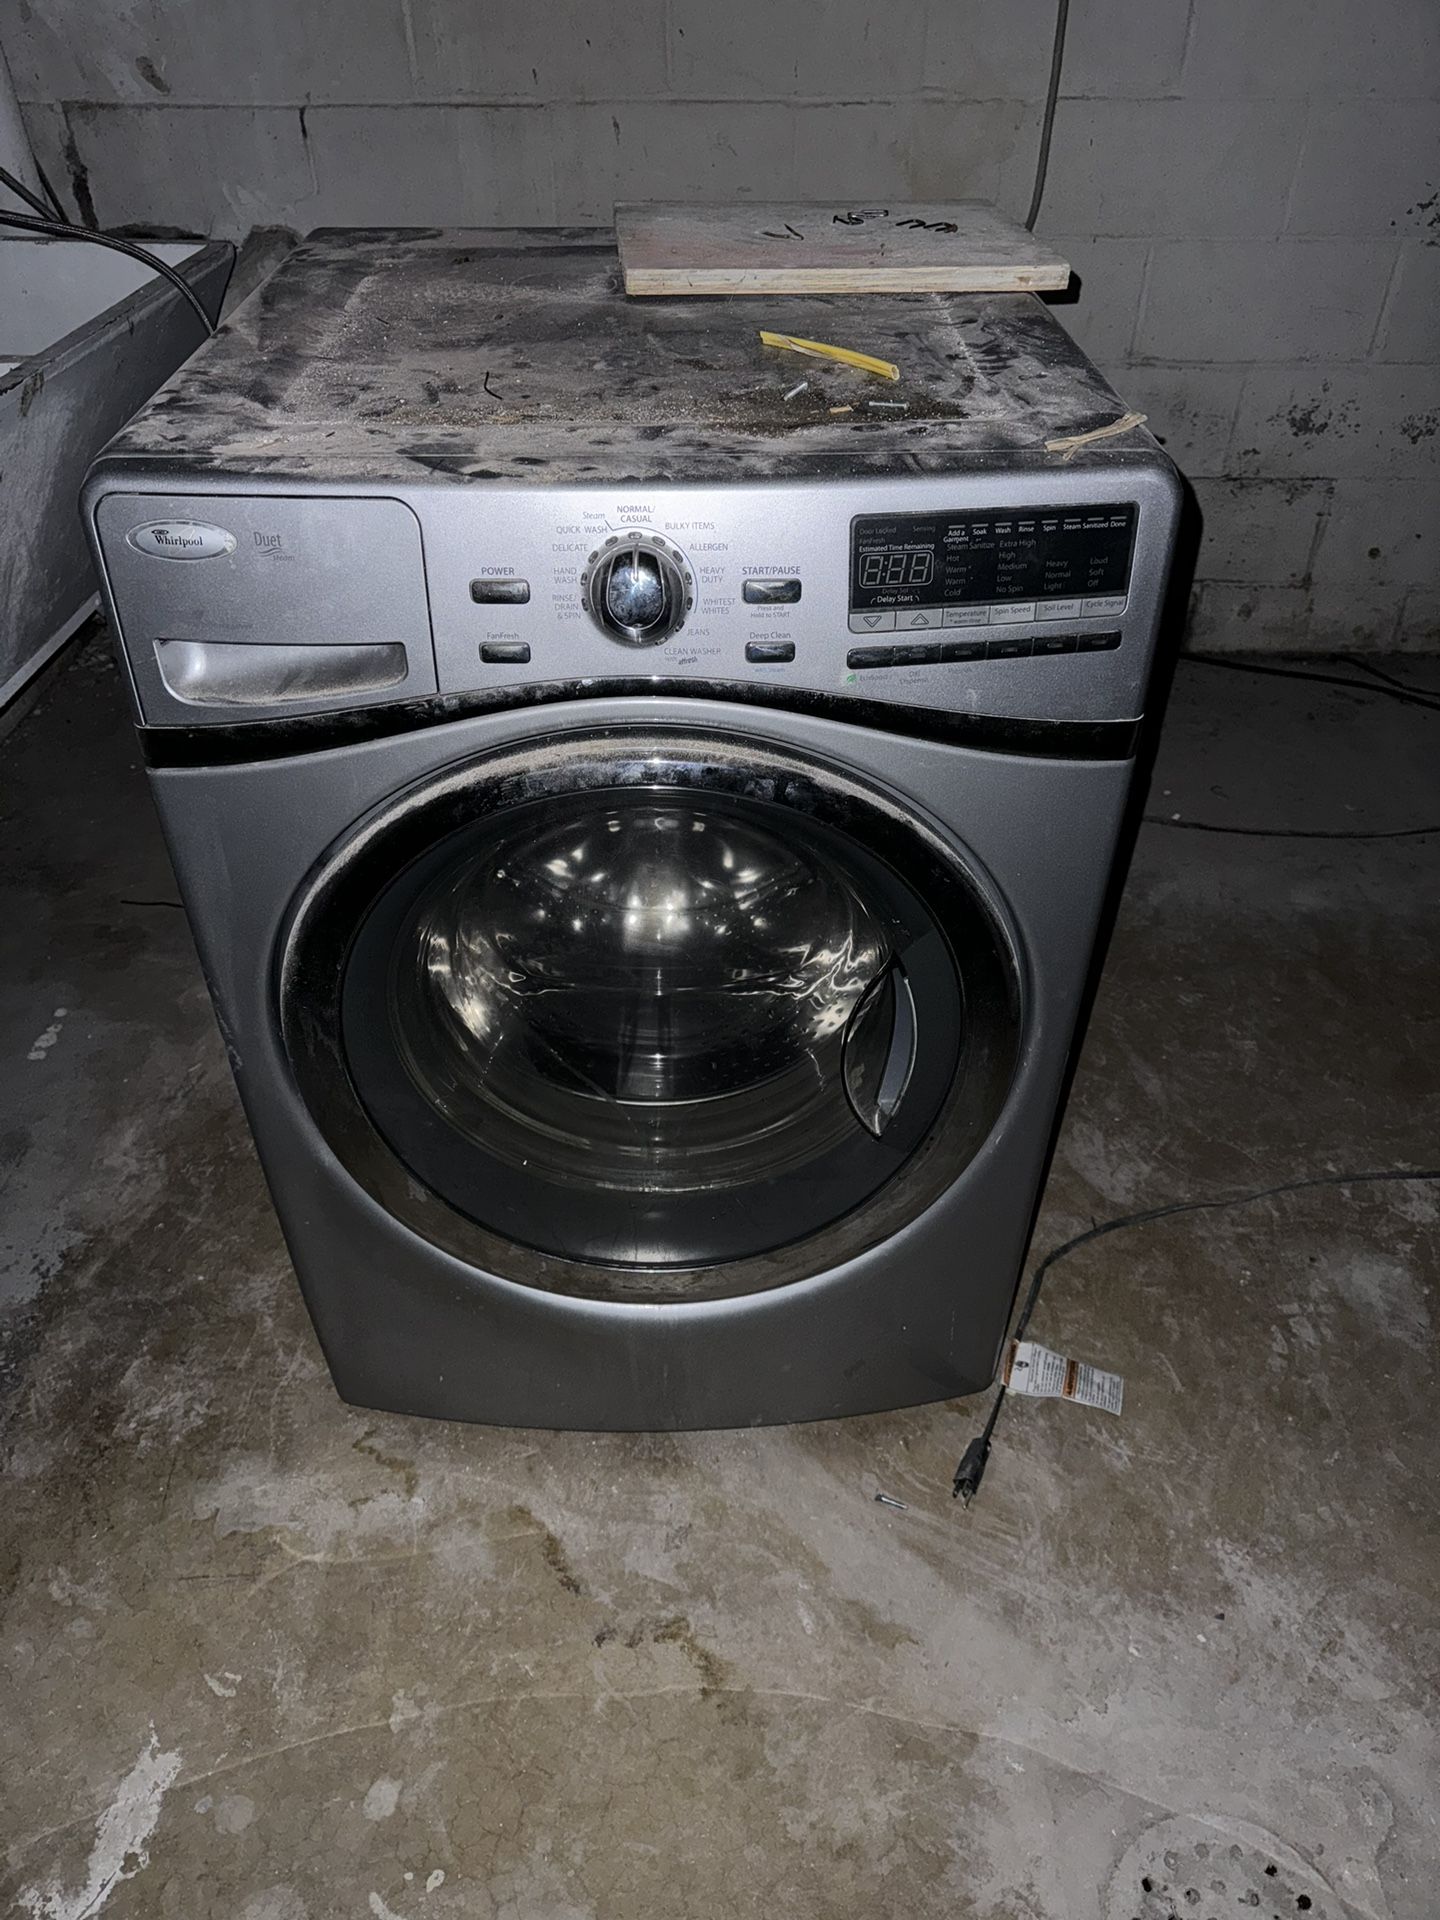 Refrigerator, Stove, Washer And Dryer Set